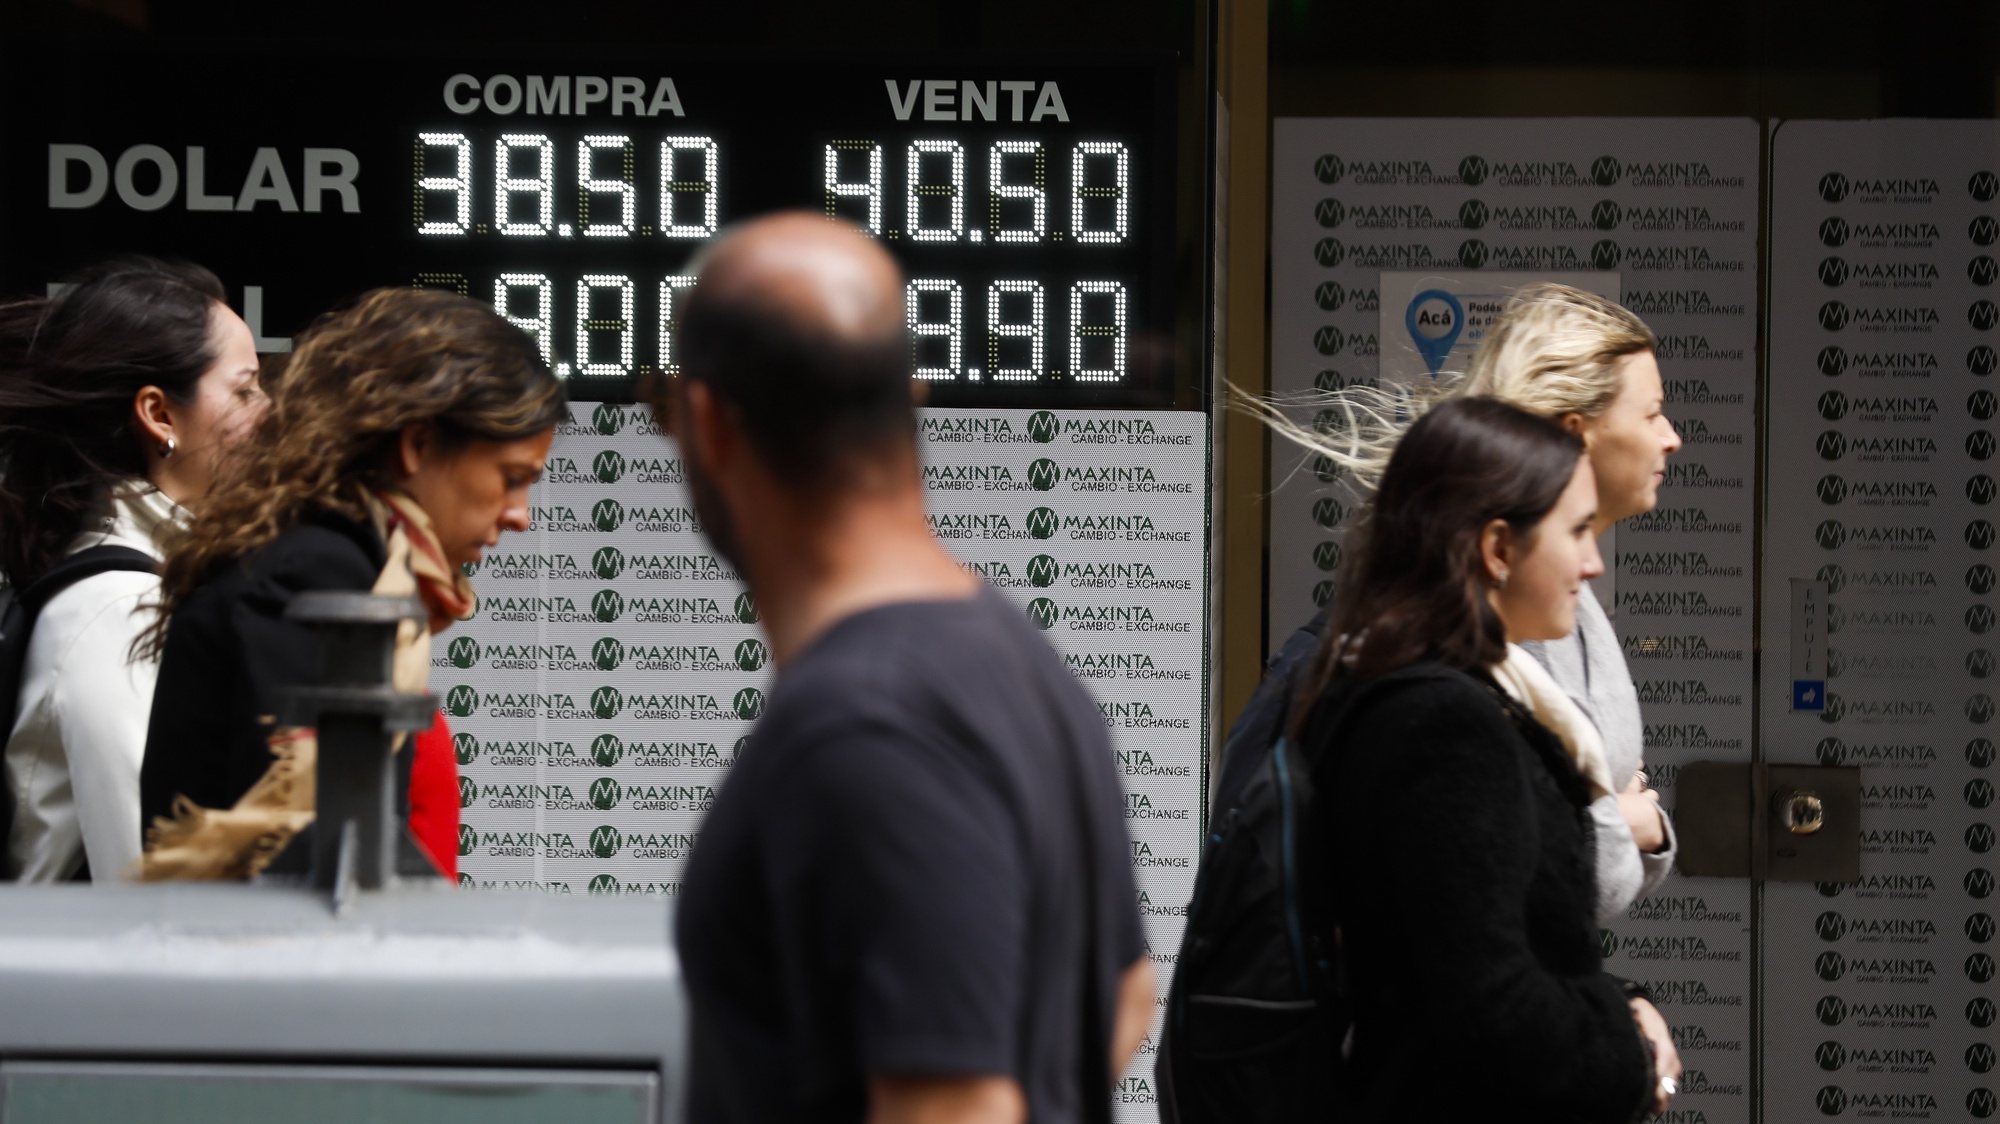 epa07051579 An exchange office shows on its panels the currencies rates, in Buenos Aires, Argentina, 27 September 2018. The dollar rose 3.06 percent on the same day in the market of Buenos Aires, compared to a day earlier&#039;s close, and again cost more than 40 pesos, after announcing a new agreement between the Government and the IMF that totals 7.1 billion US dollars to the 50 billion US dollars loan signed in June 2018.  EPA/DAVID FERNANDEZ